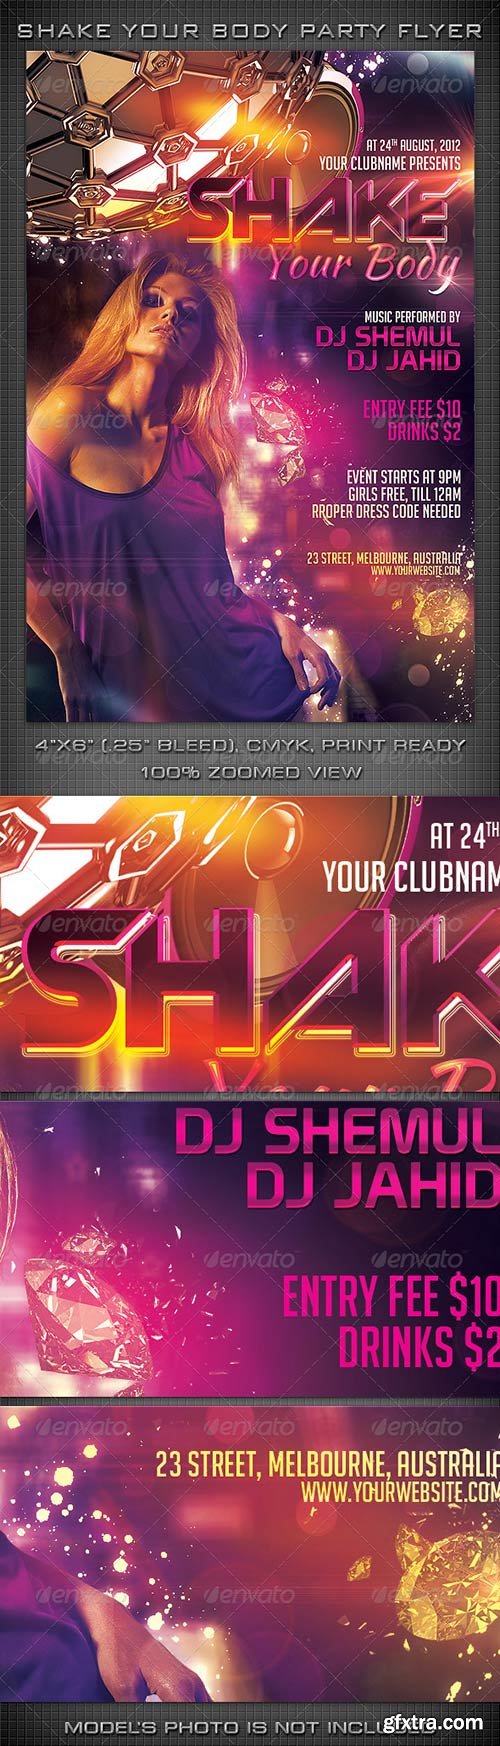 Graphicriver - Shake Your Body Party Flyer 4959294